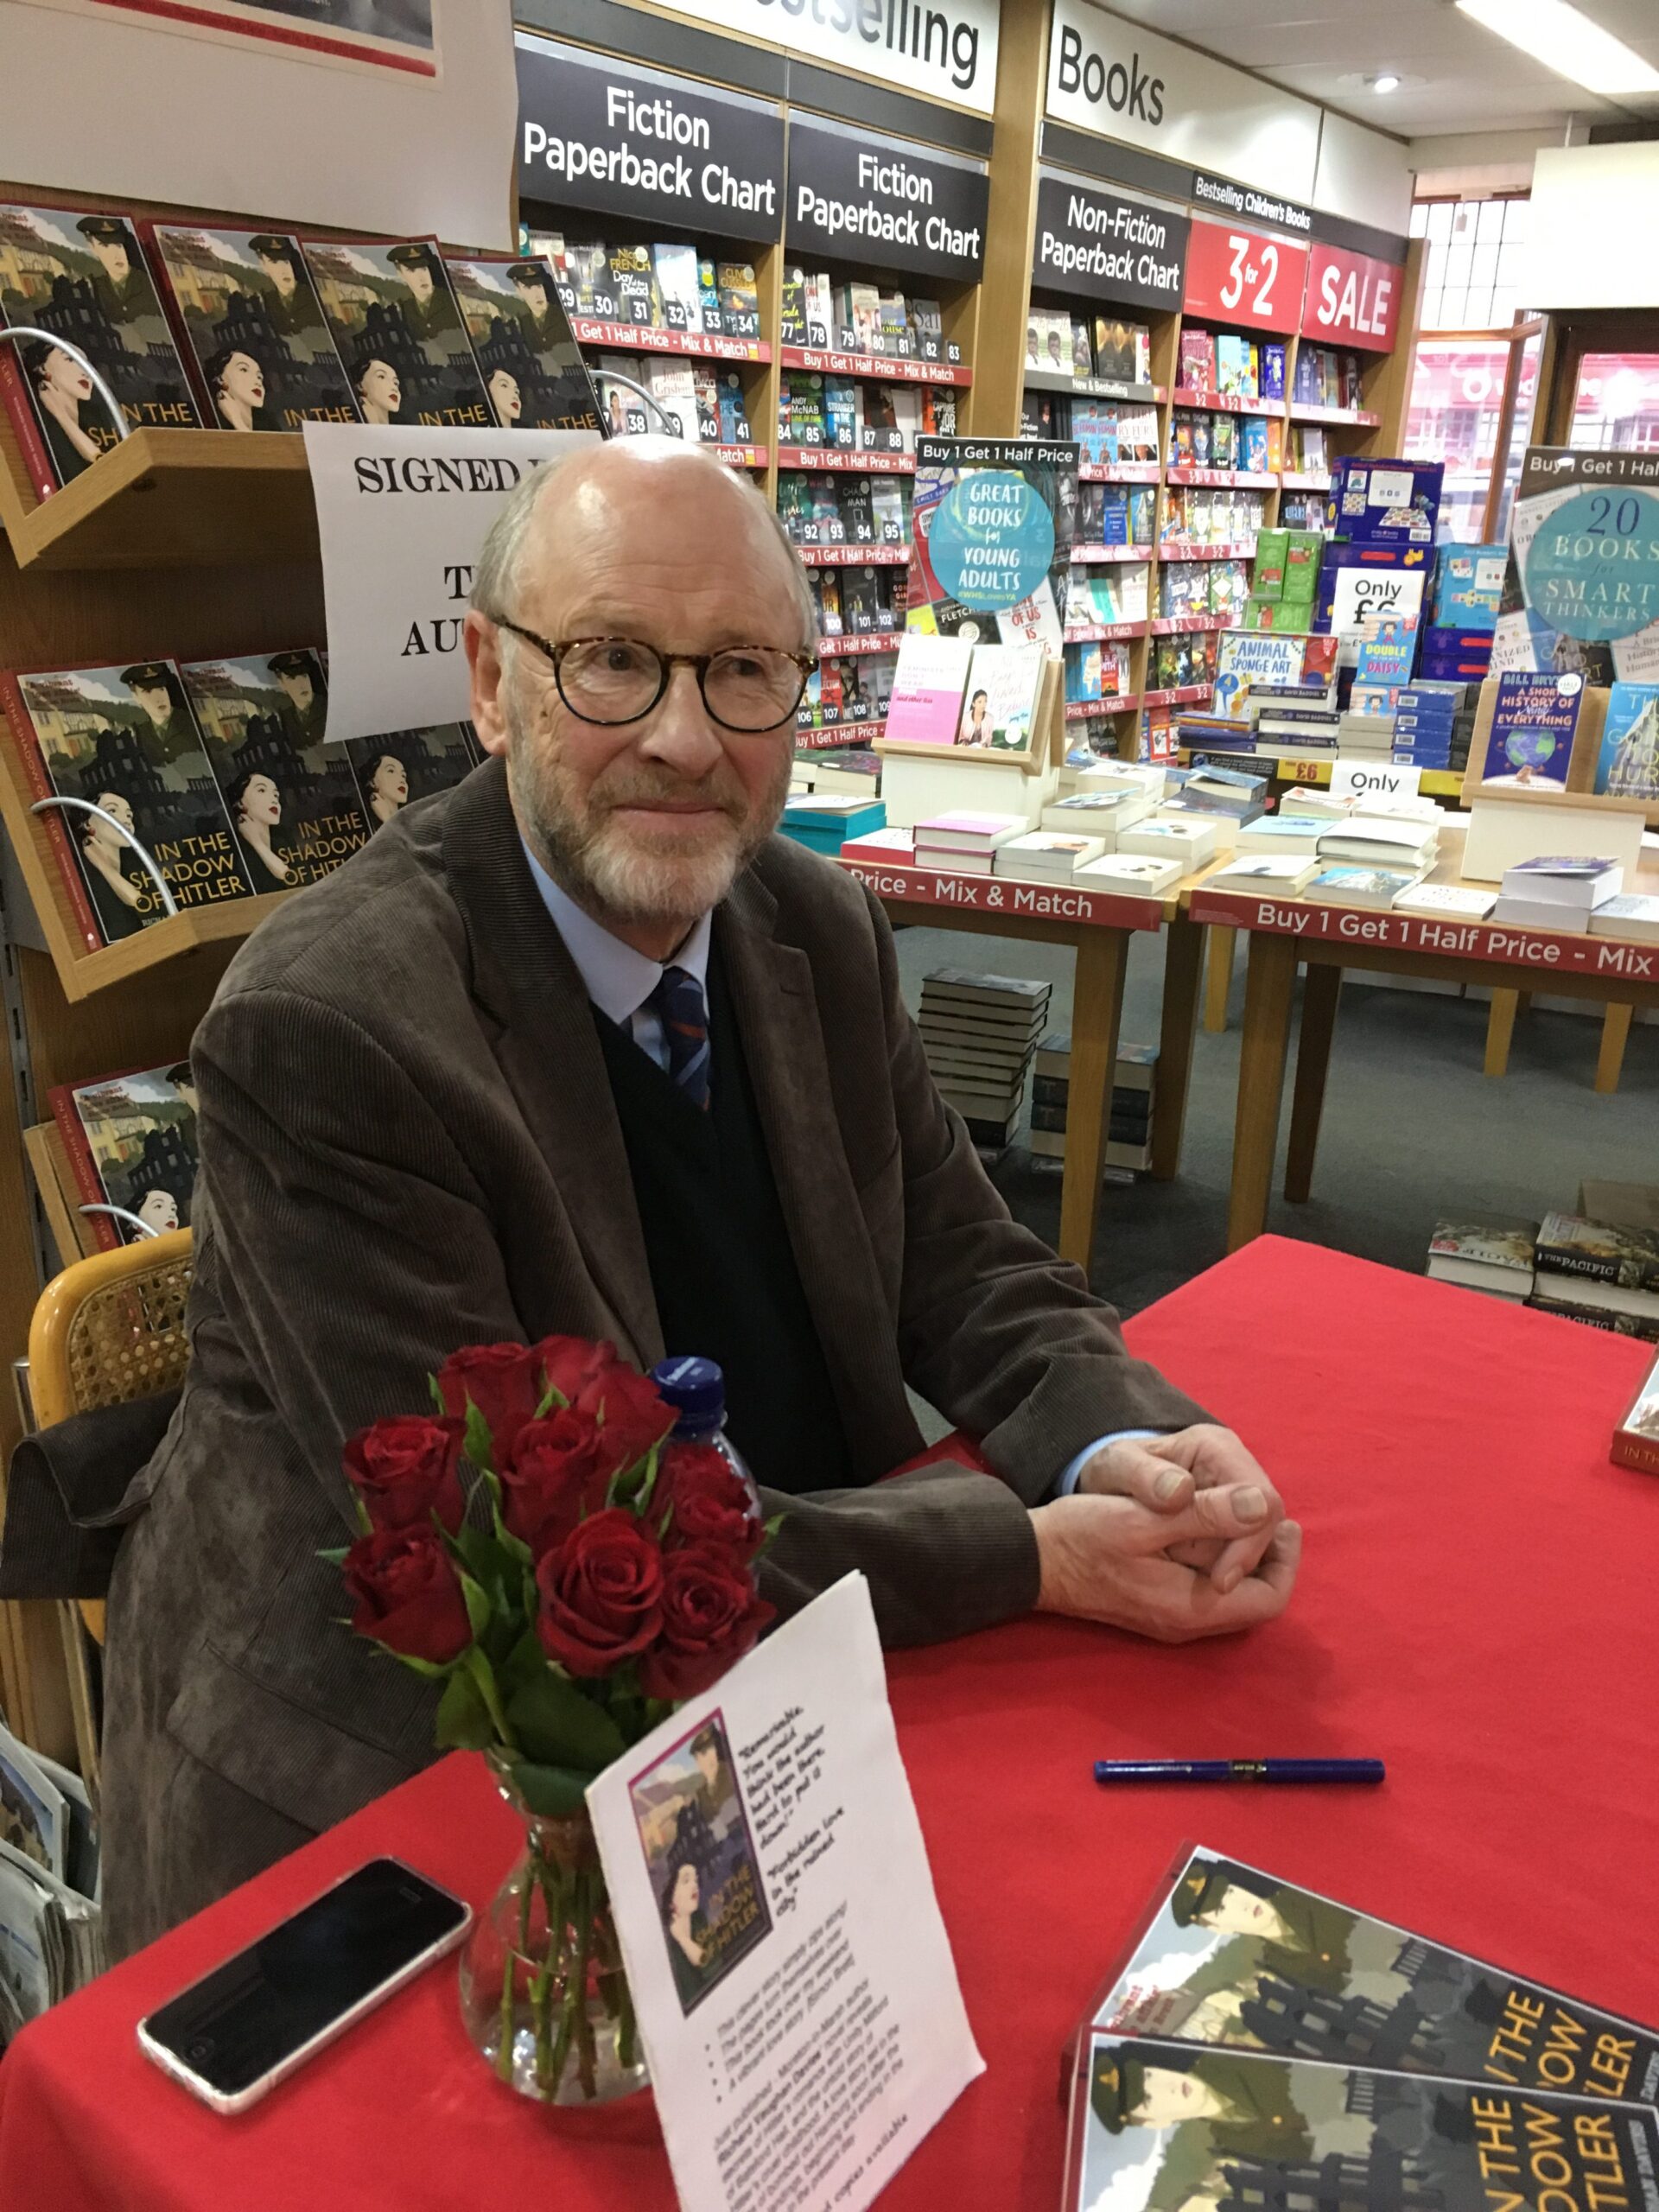 Bookstore Chain WH Smith Opens Up To Indie Authors: Case Study With Richard Vaughan-Davies